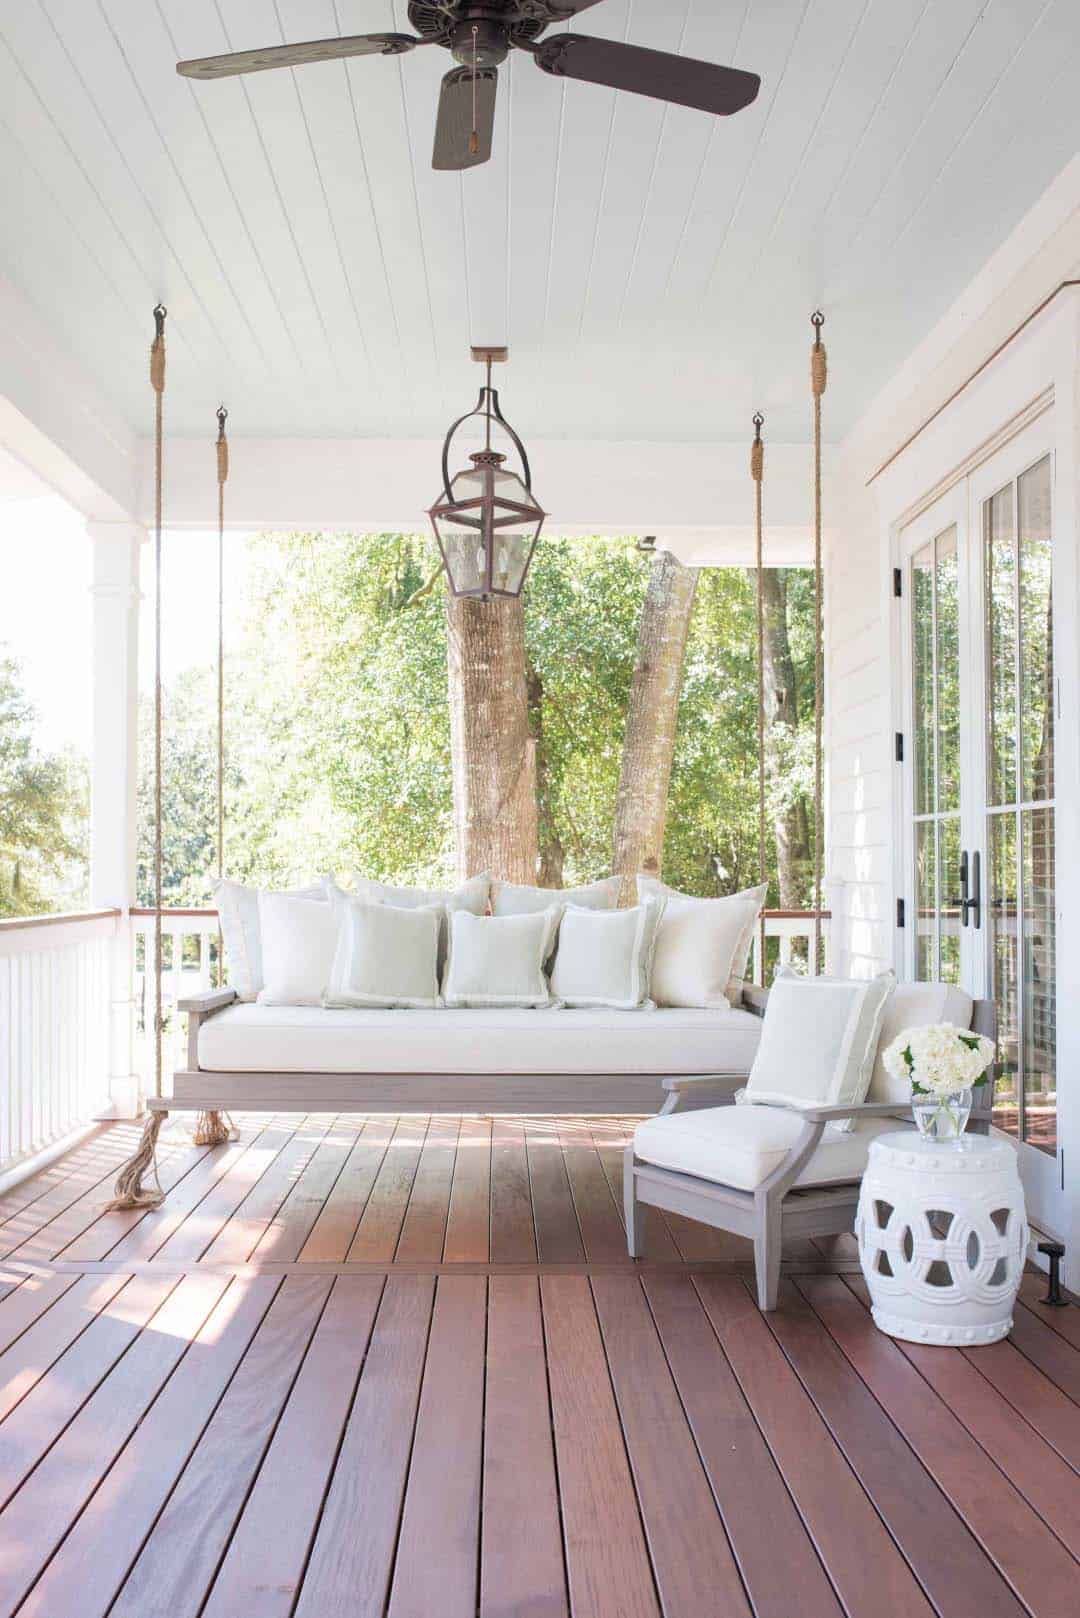 Porch Swing Plans & Ideas to Chill in
Your Front Porch